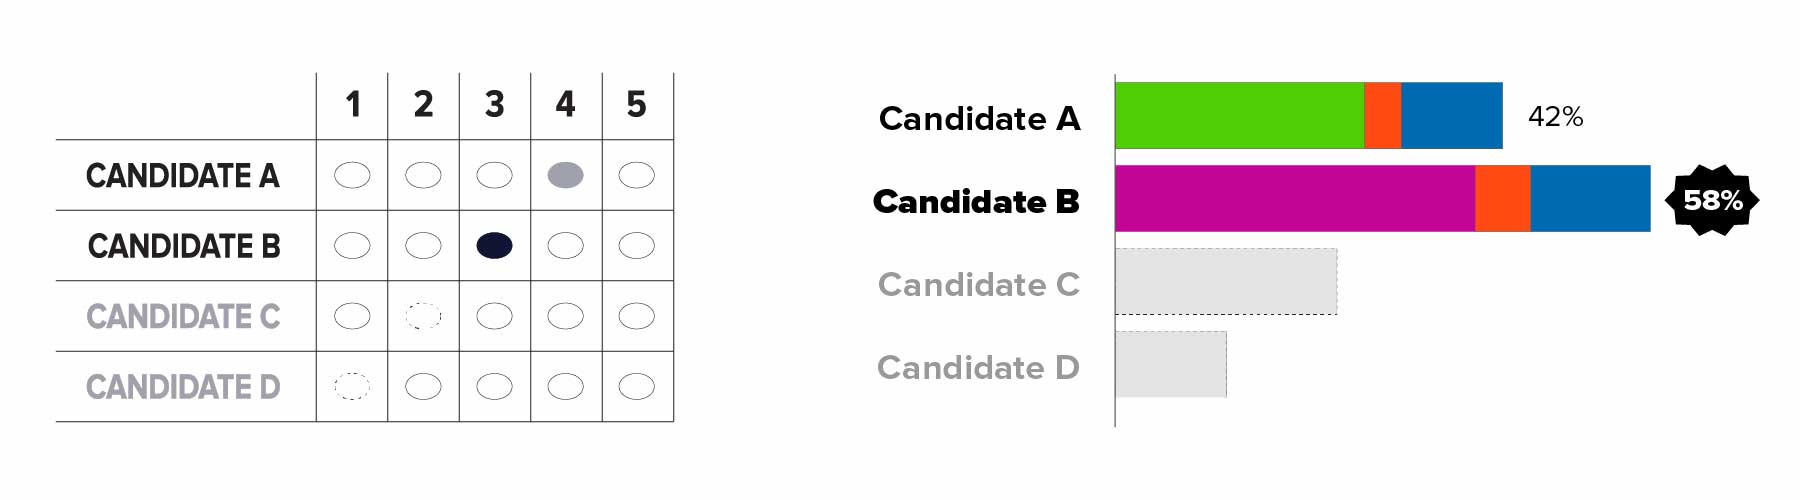 On left: A correctly marked RCV grid ballot where candidate A through D appears in rows and number 1 through 5 appears in columns. Candidate B is ranked 3 and Candidate A is ranked 4. Candidate C and Candidates D's names are grayed out because they were eliminated in previous rounds. The oval for Candidate B who is ranked 3 is darker than the other ovals. On right: Bar chart displaying the results of vote after Round 2. Candidate A is shown in green and has 27 percent of first-choice votes plus 4 percent of Candidate D's orange votes to total 31 percent. Candidate B is shown in purple and has 39 percent of first-choice votes plus 6 percent of Candidate D's orange votes to total 45 percent. Candidate C's entire bar and name is grayed out, and arrows point from Candidate C to the other two remaining candidate's bars. The ballots for the 24 percent of voters whose top choice in this round was Candidate C will move to the next-highest ranked candidate on their ballots. Candidate D's bar and name is grayed out because they are no longer active.